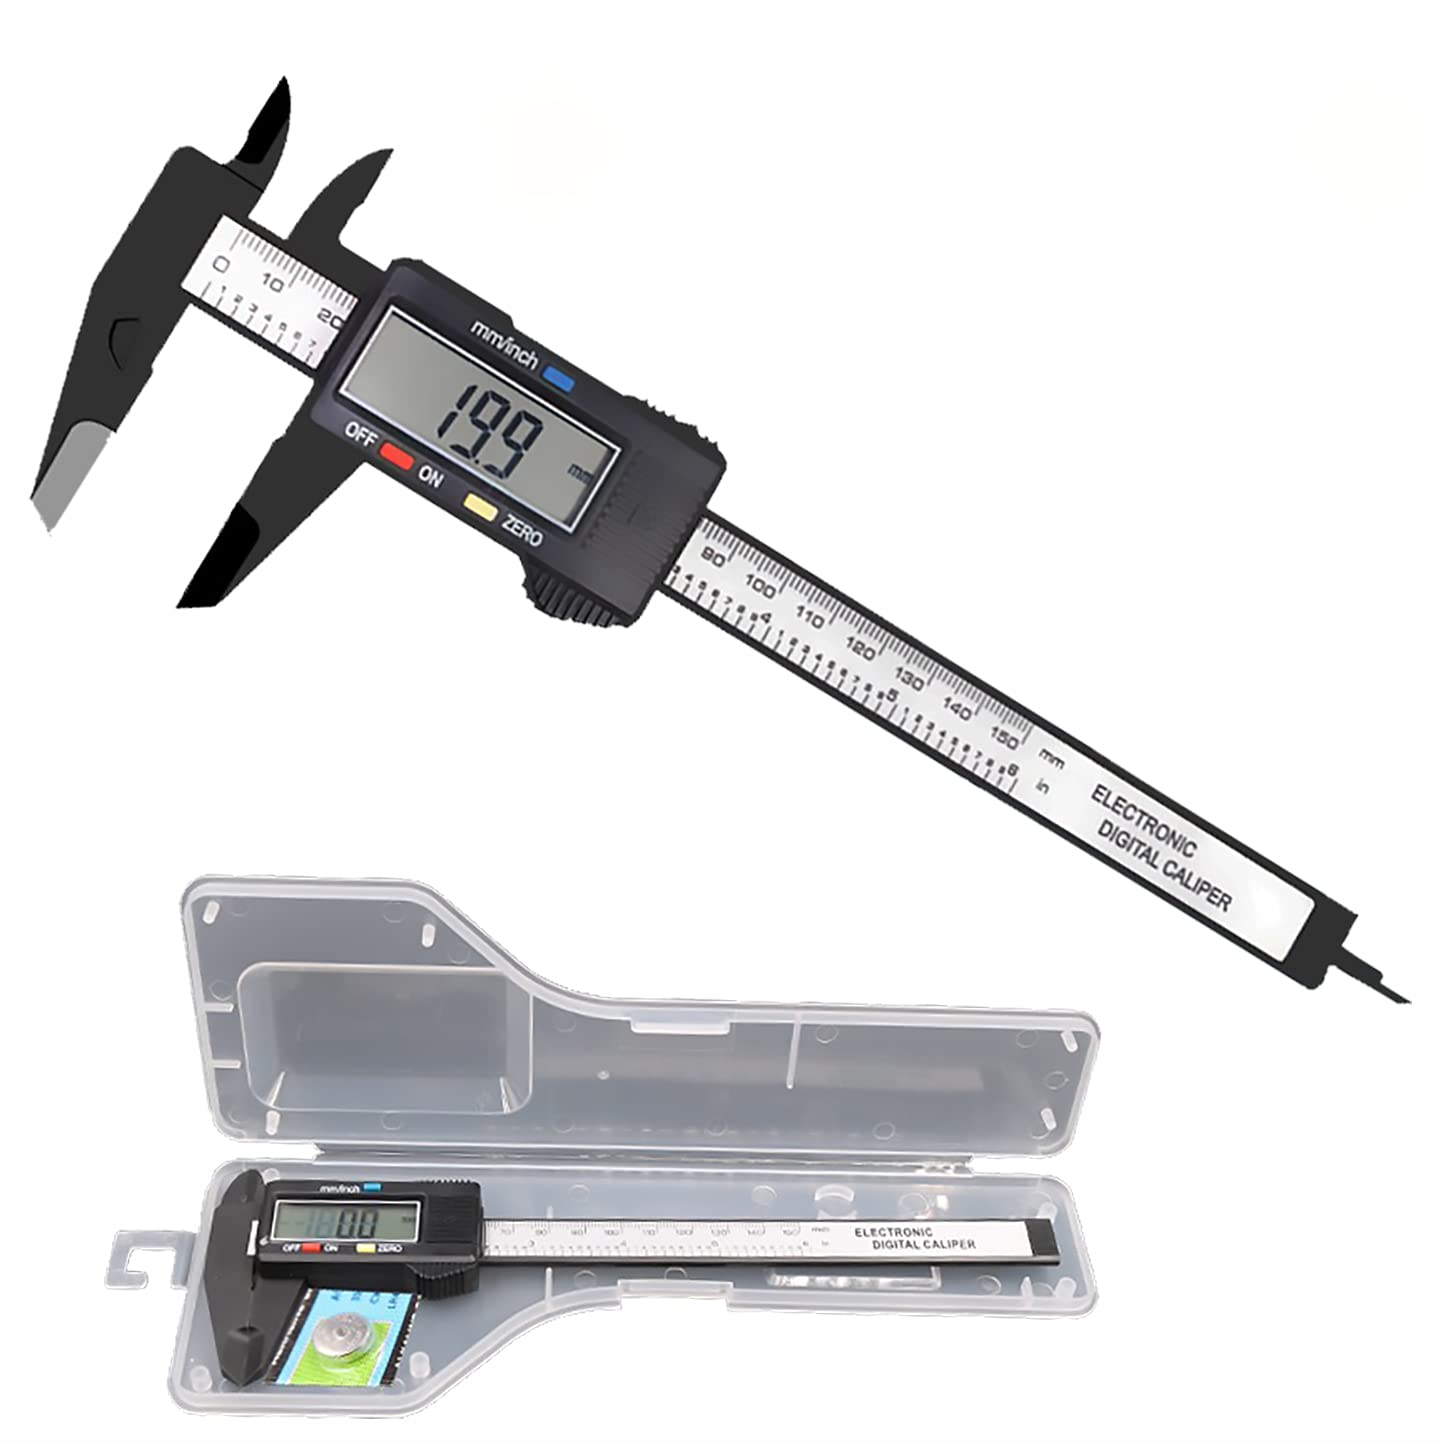 Electronic Digital Caliper, LCD | 0 to 6 inch Inch and Millimeter Conversion, Automatic Shutdown Function, Very Suitable for home/jewelry/3D Printing/DIY Measurement, etc